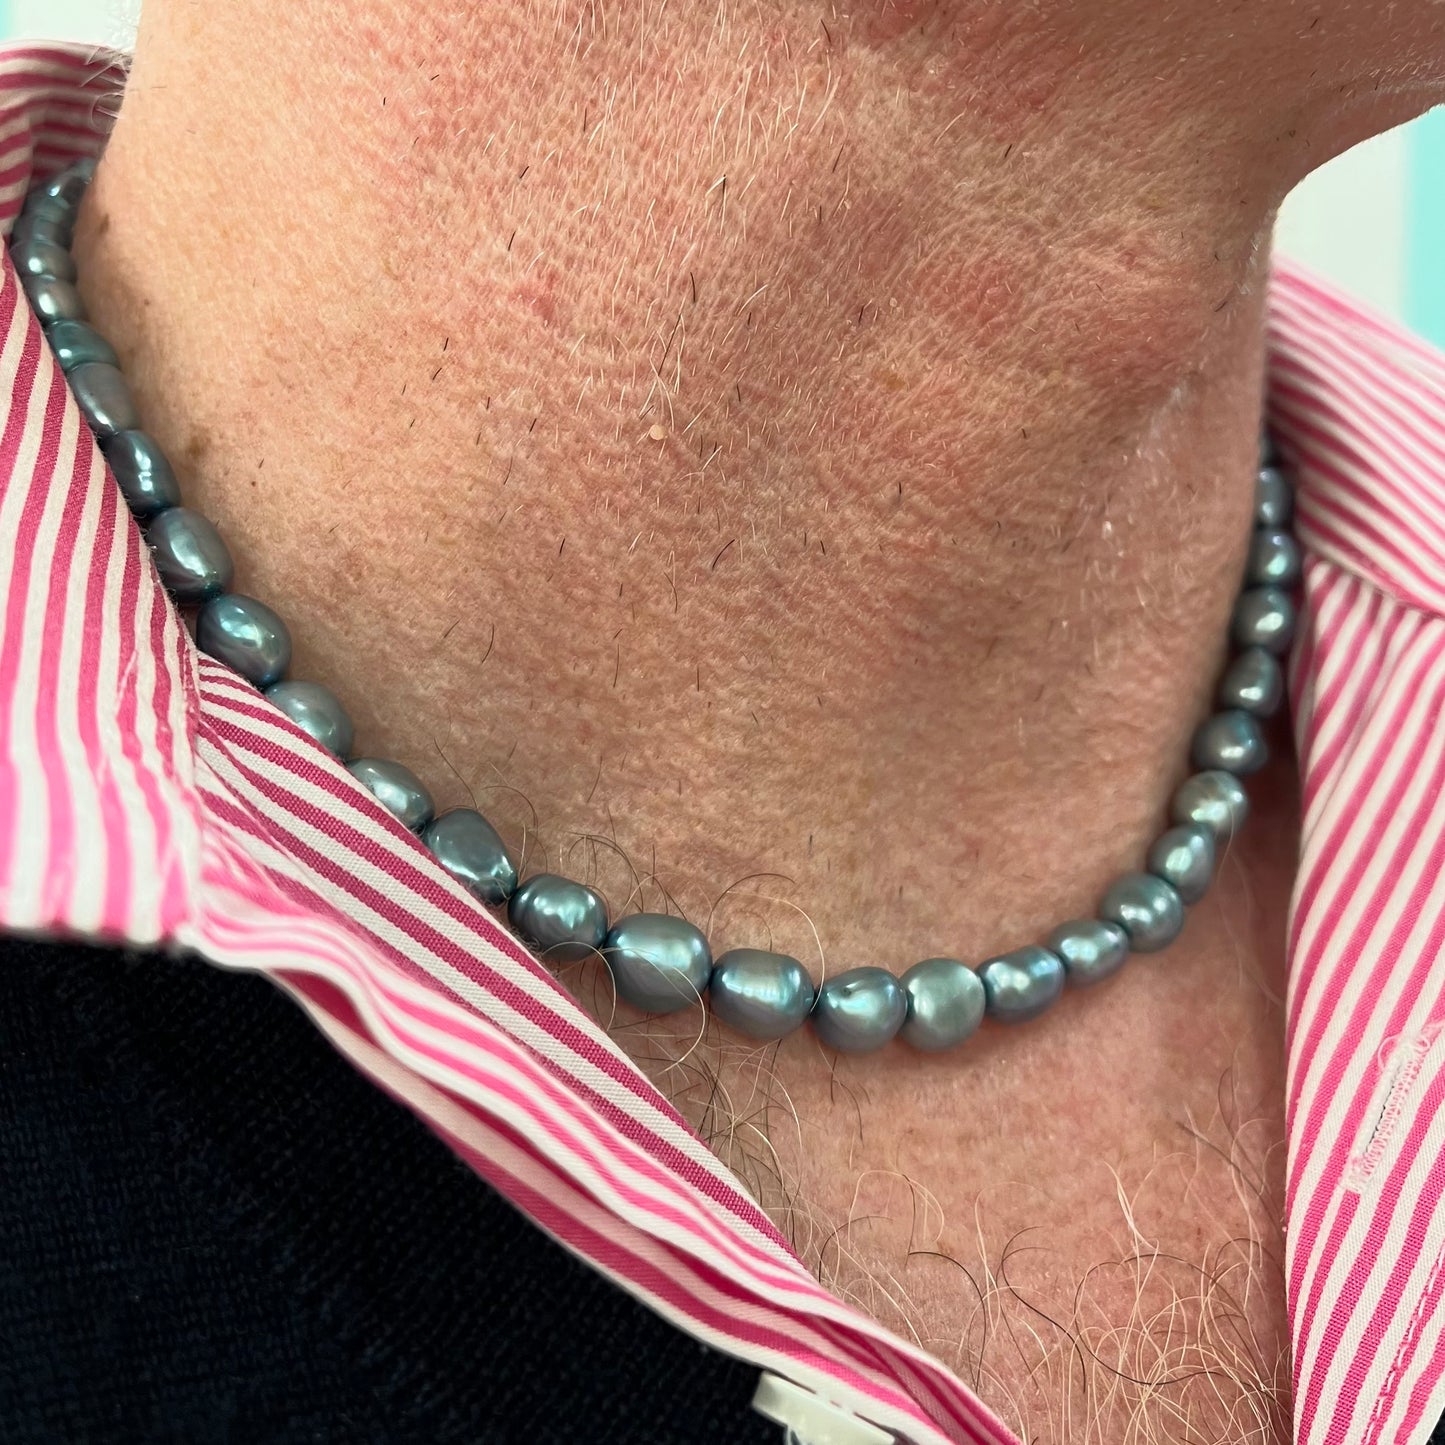 Gents Teal Blue Pearl Necklace